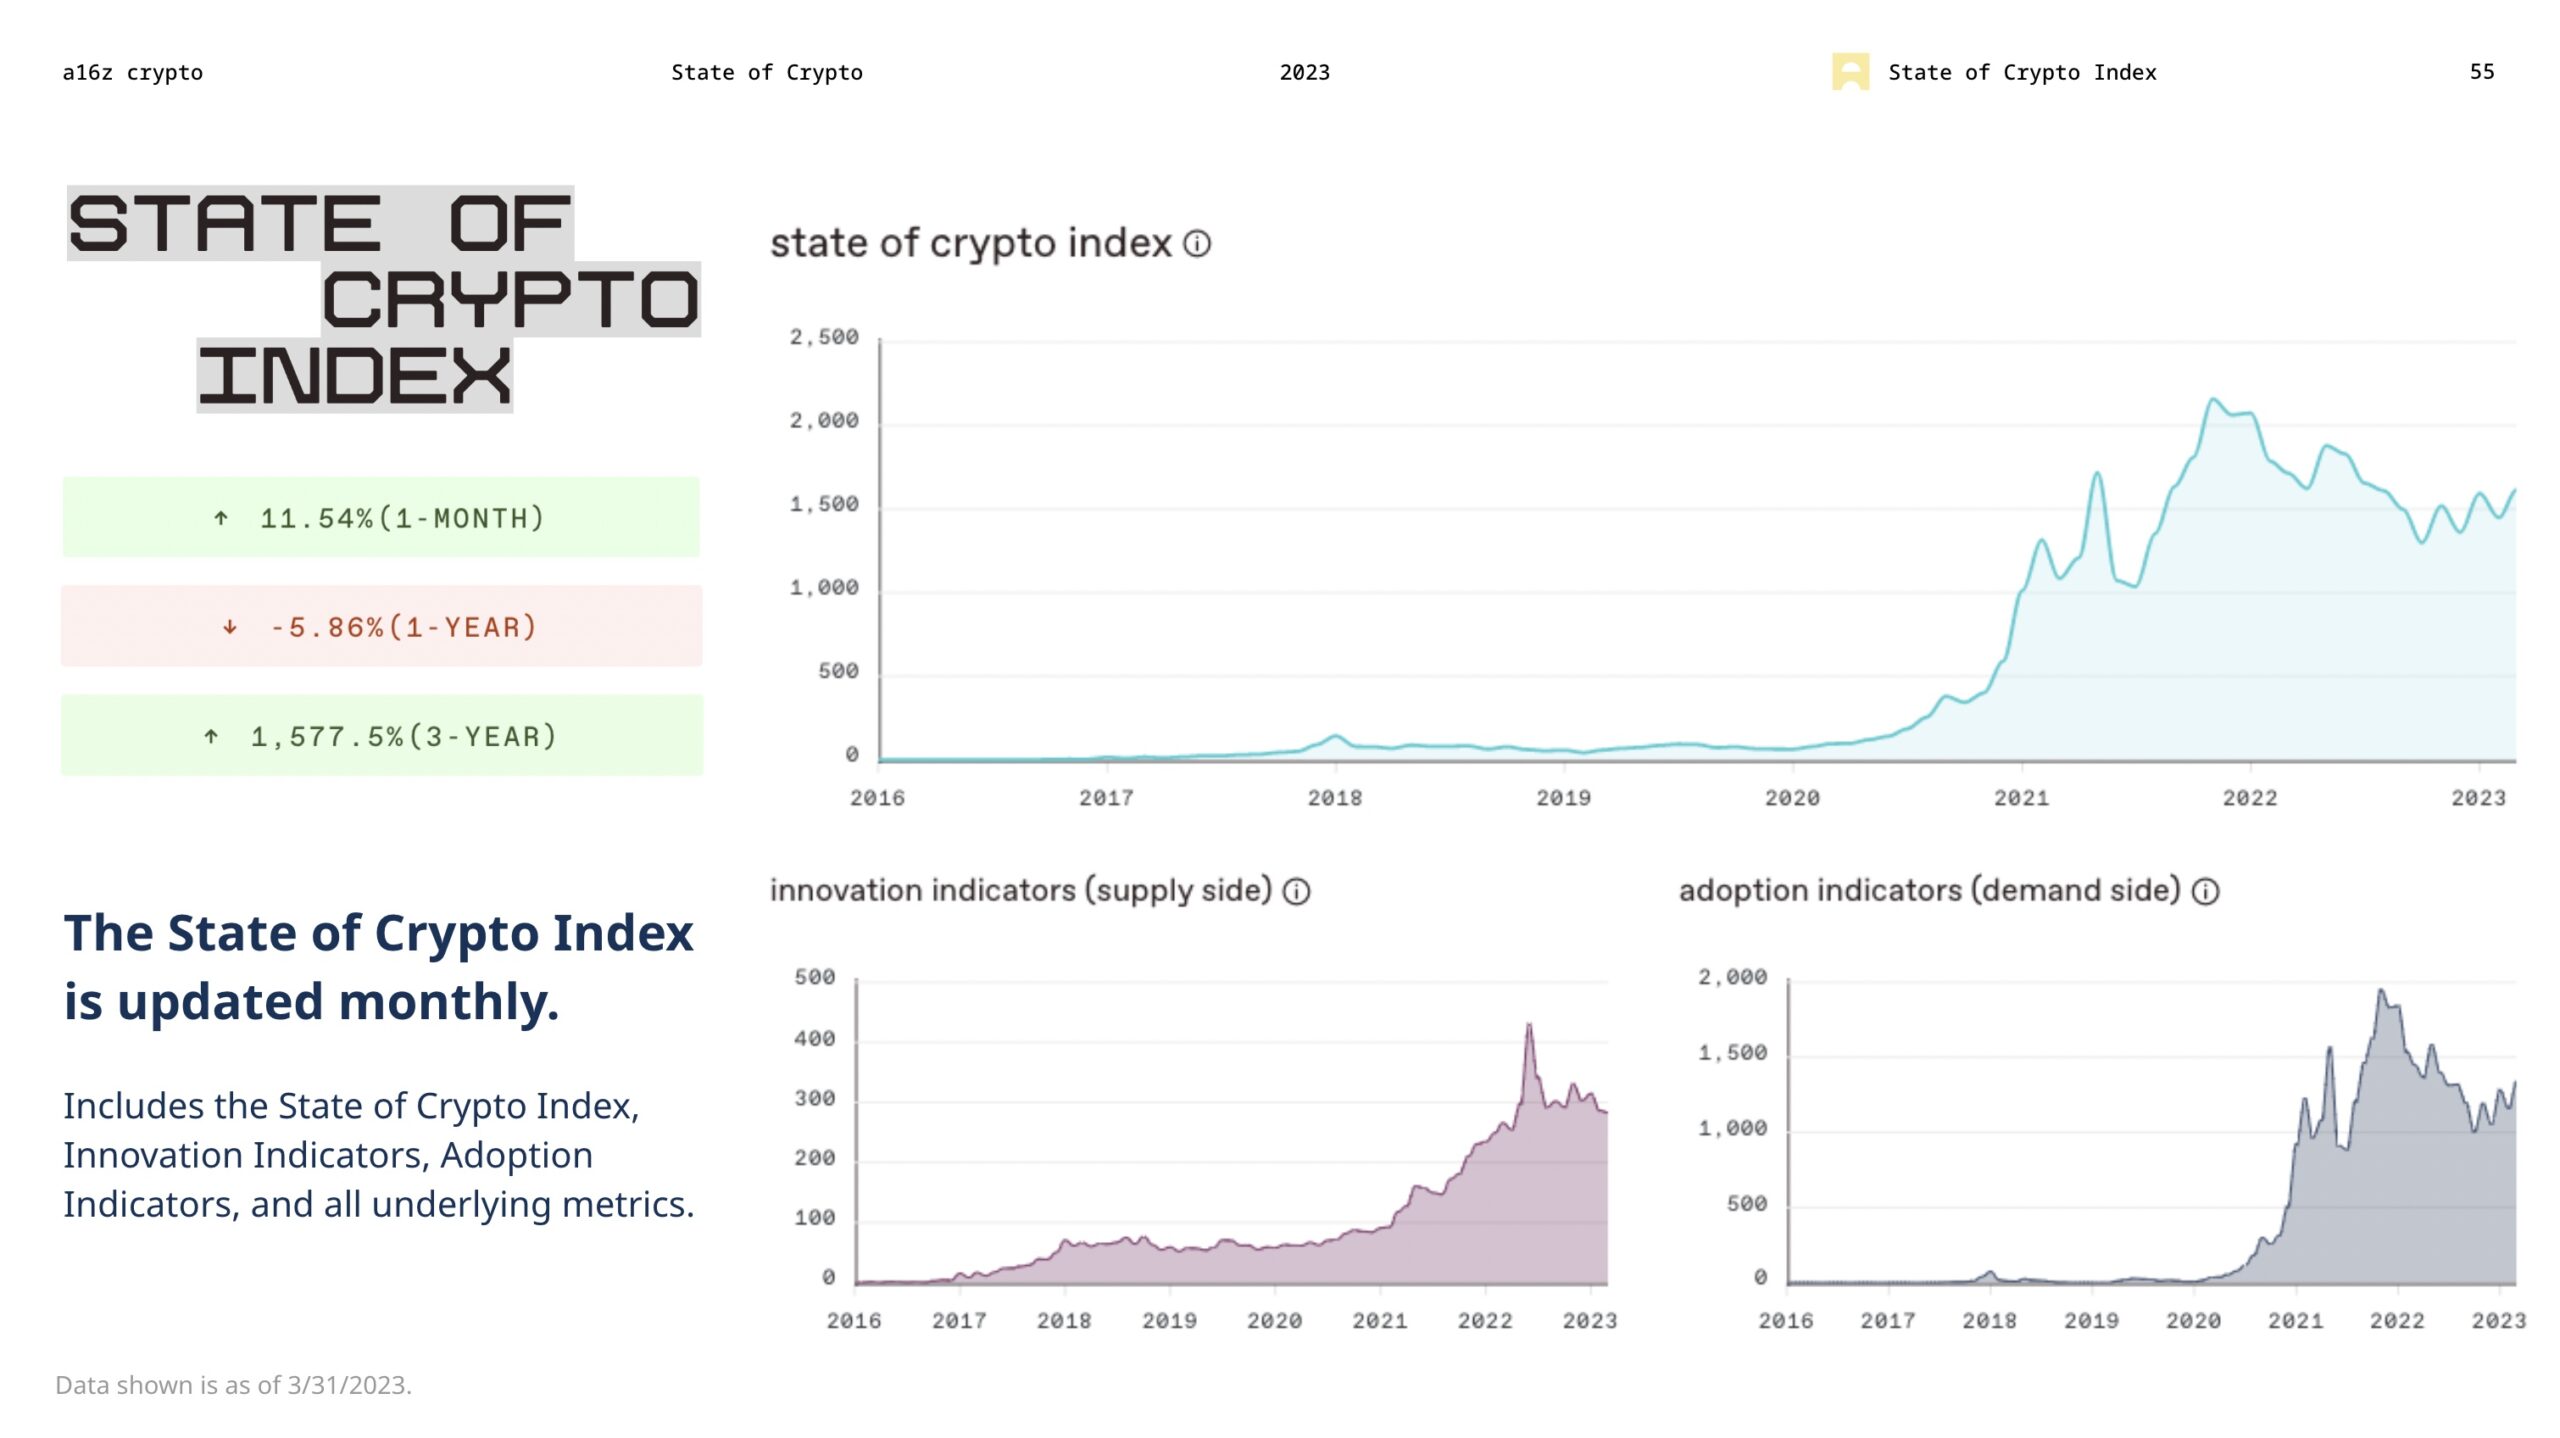 The State of Crypto Index